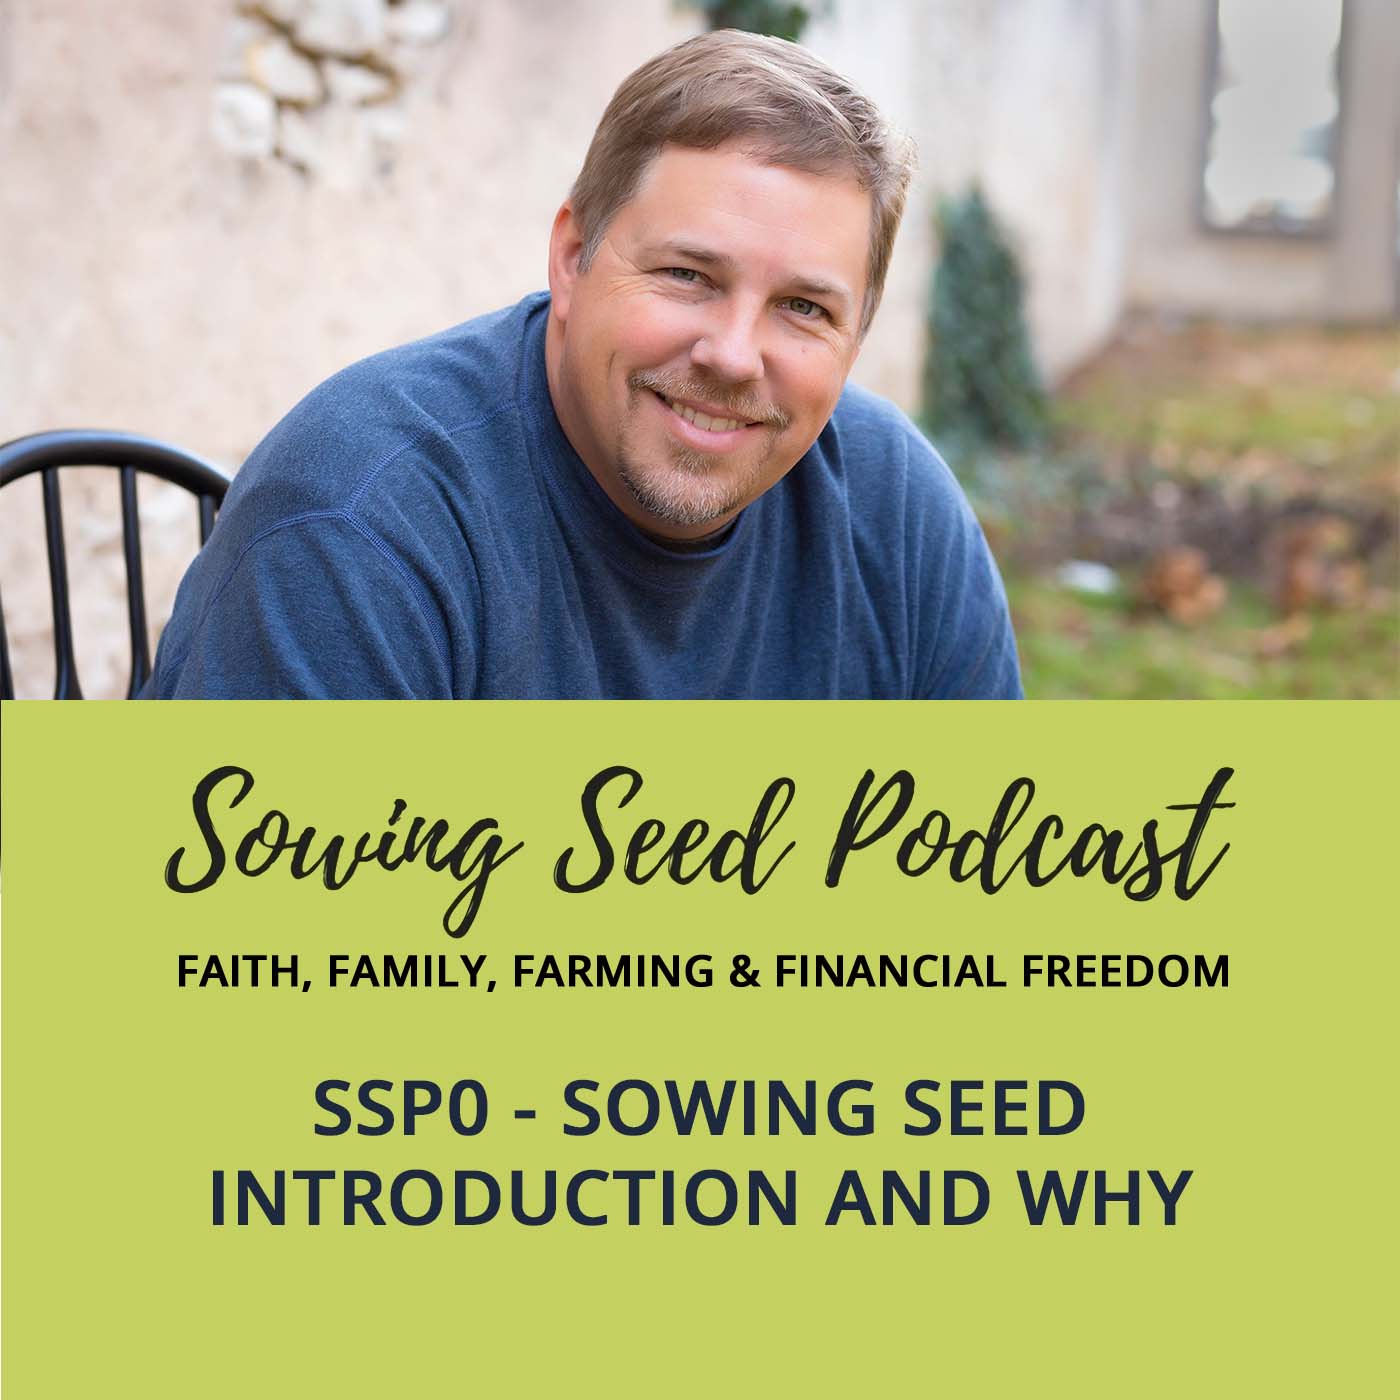 Sowing Seed Podcast